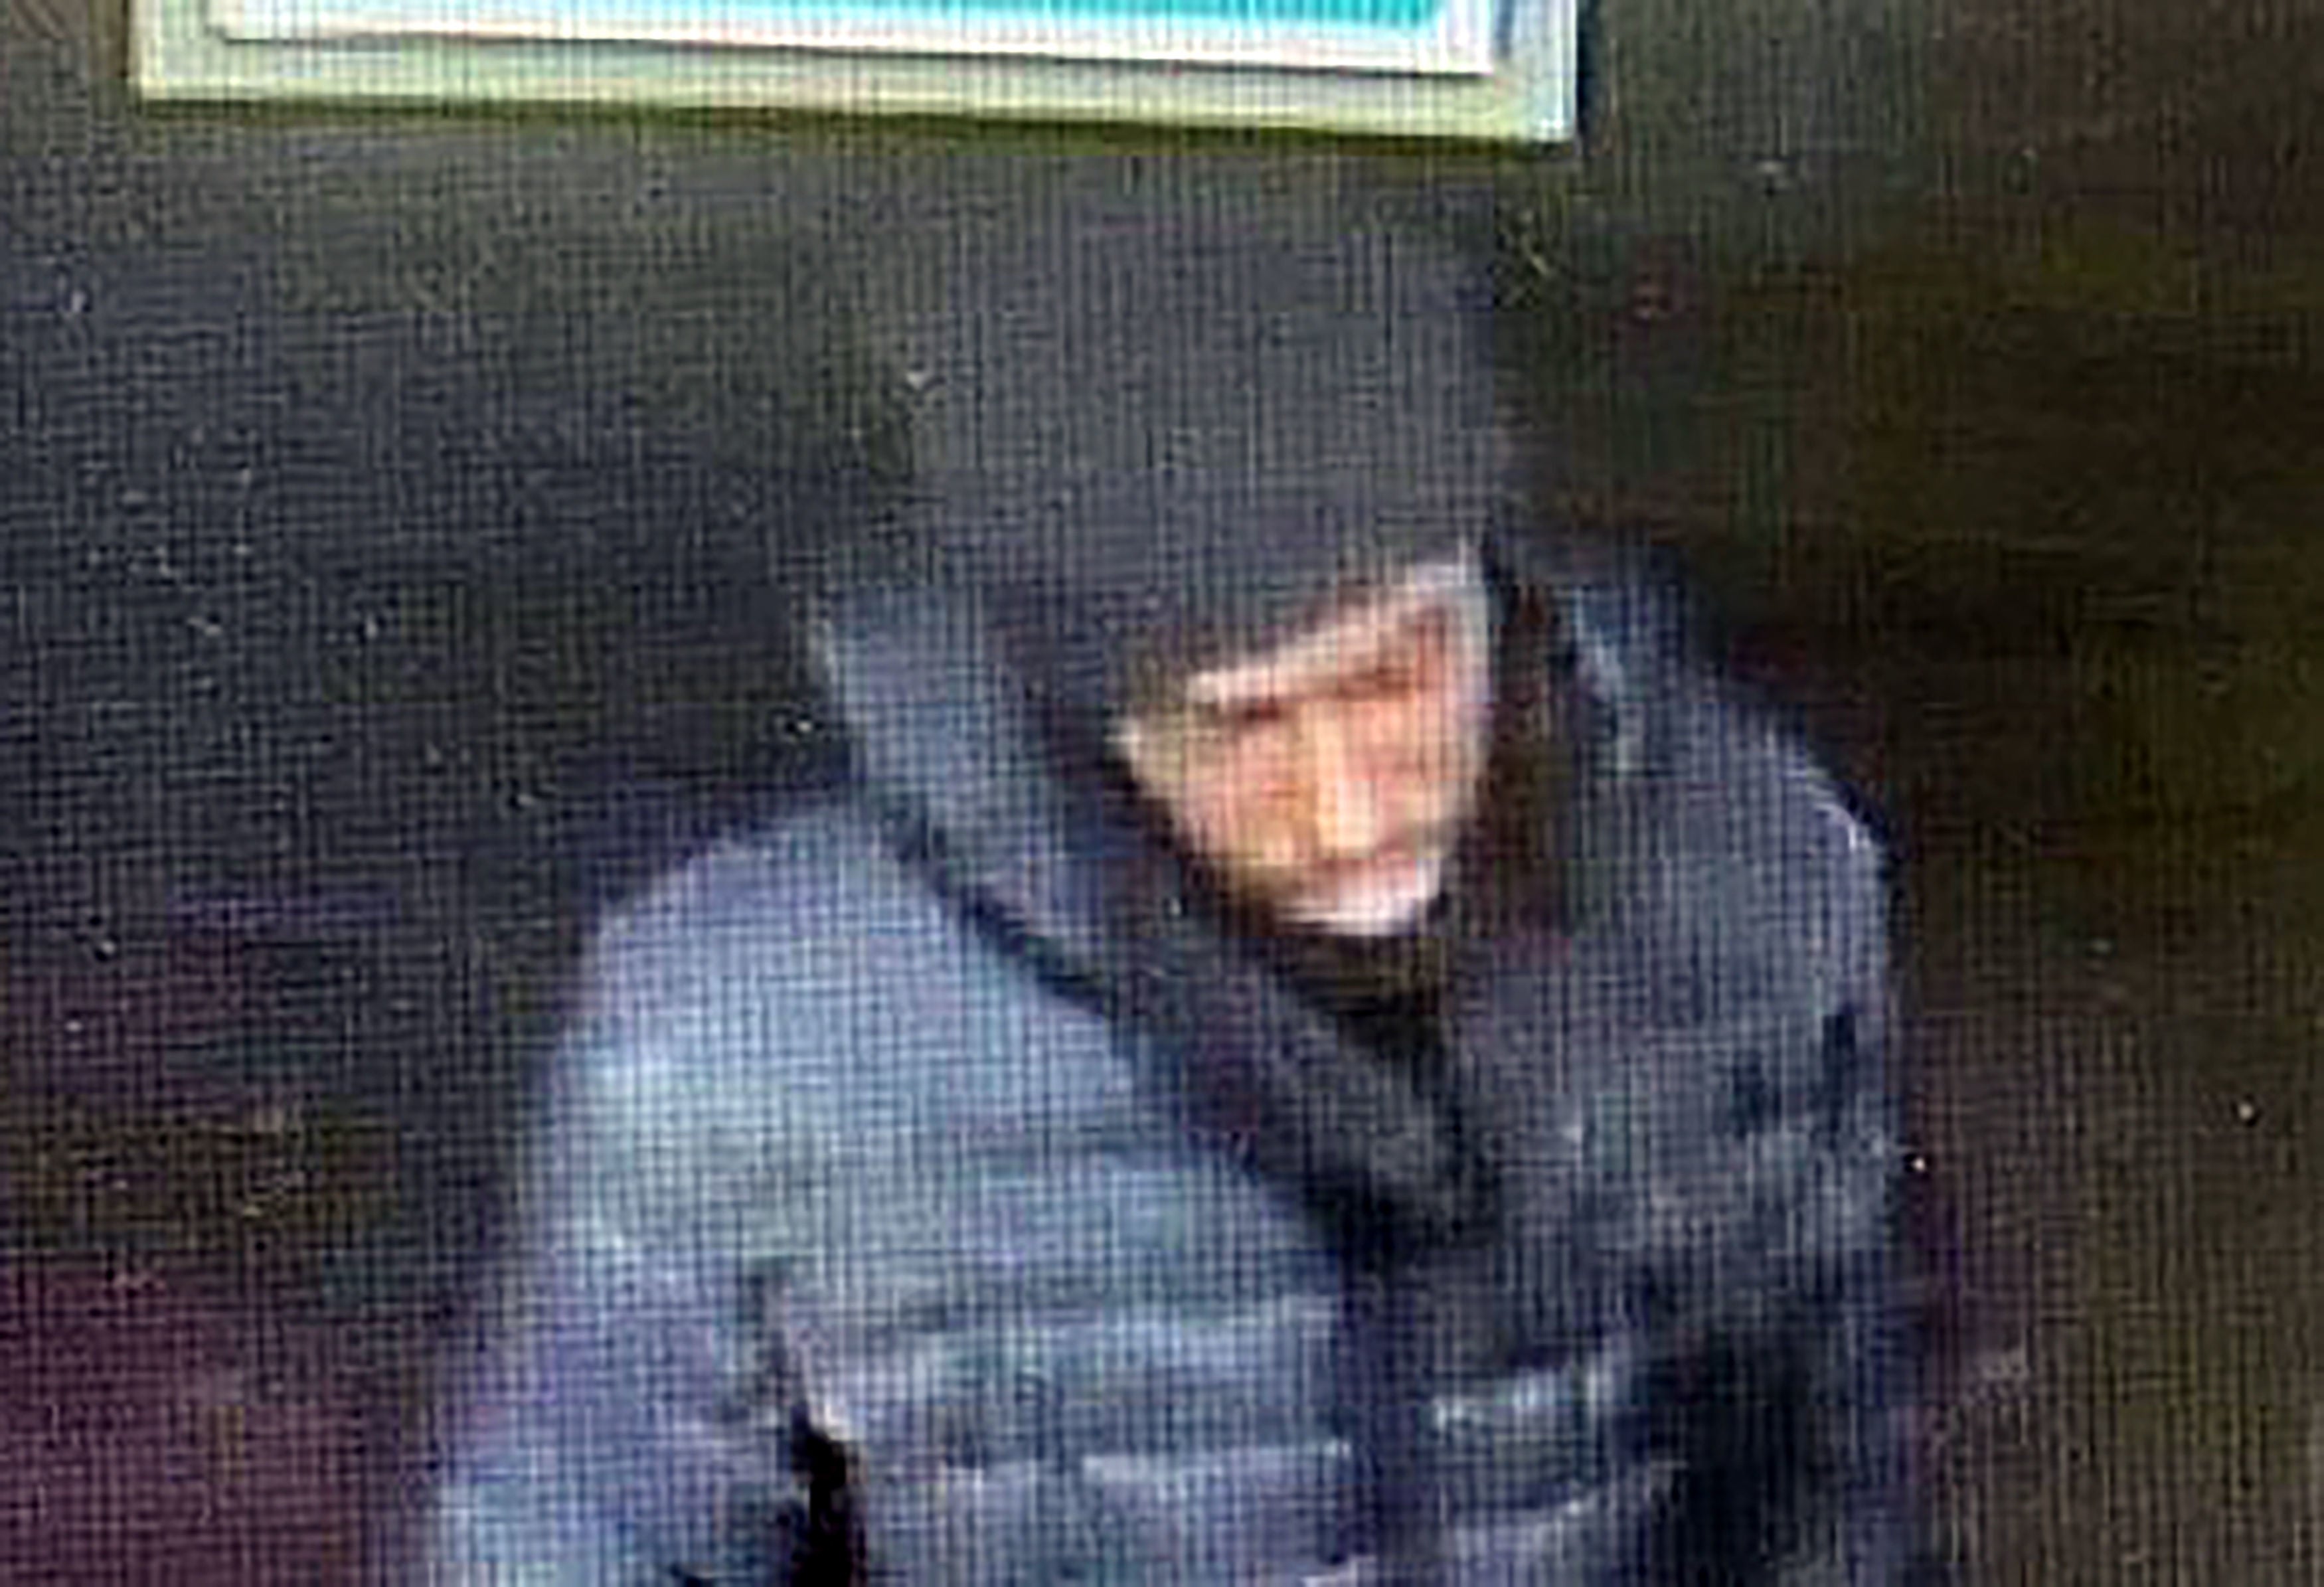 Police have released a CCTV image of a man sought over the attack